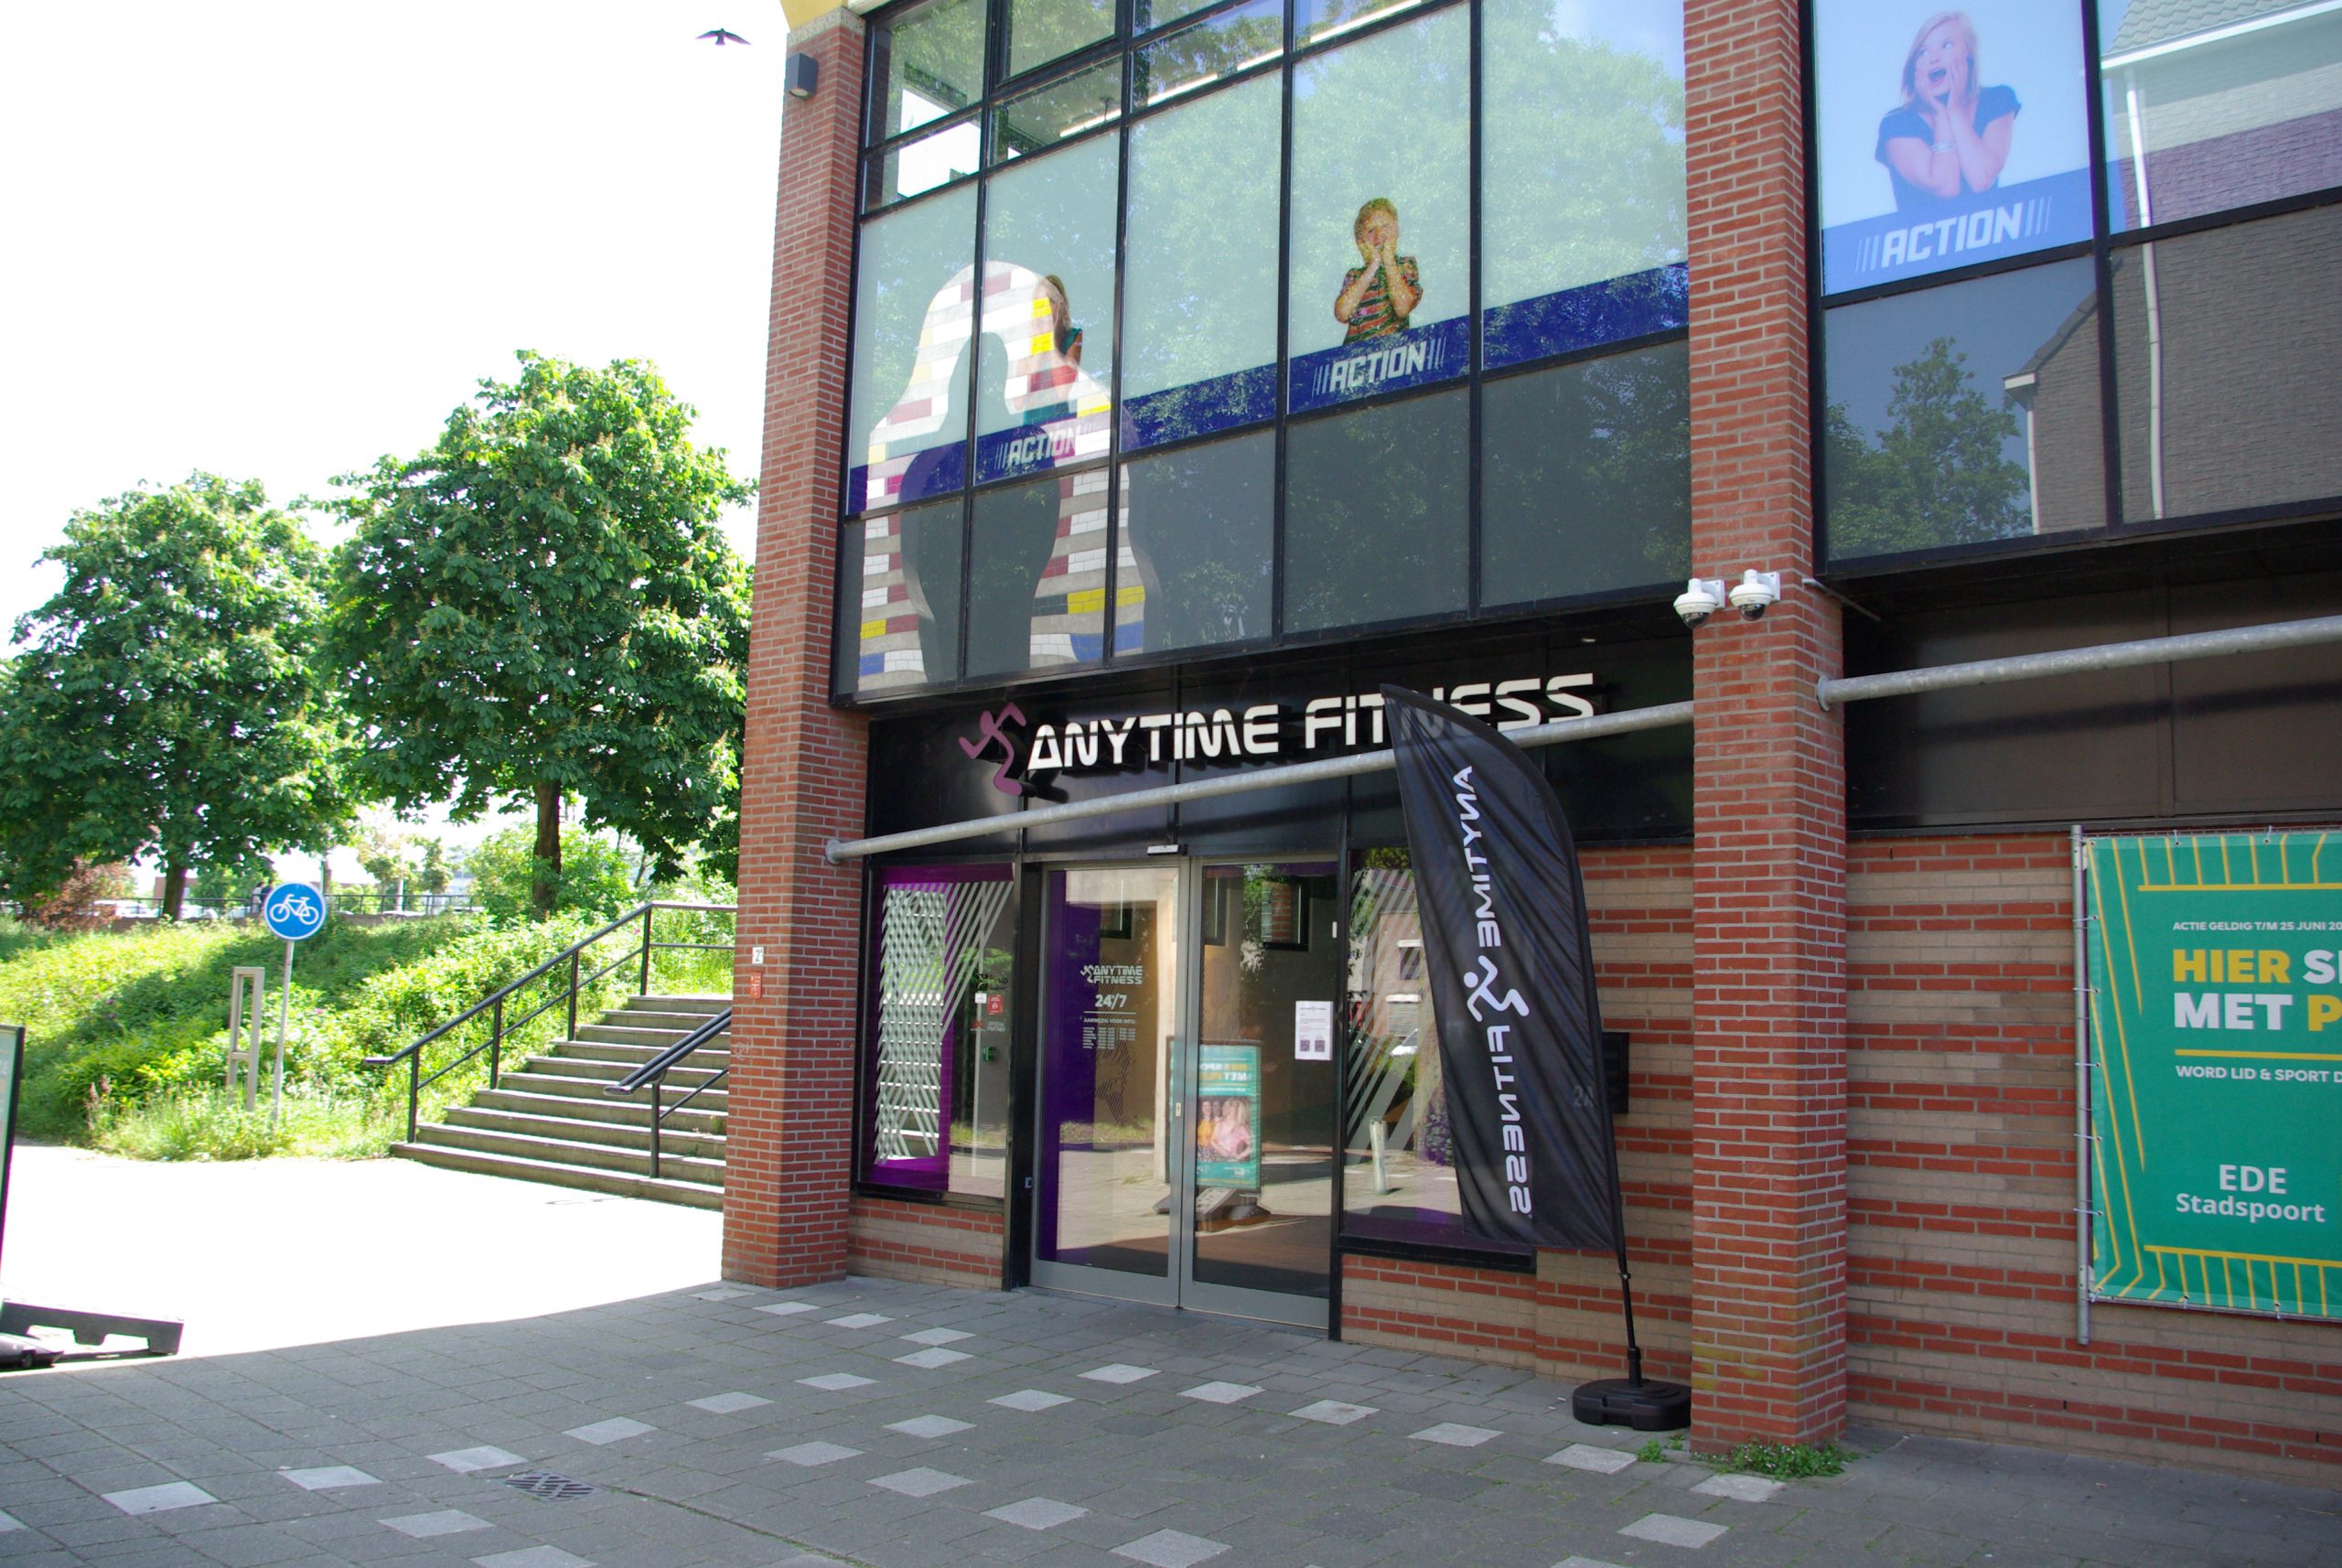 Anytime Fitness Ede Stadspoort